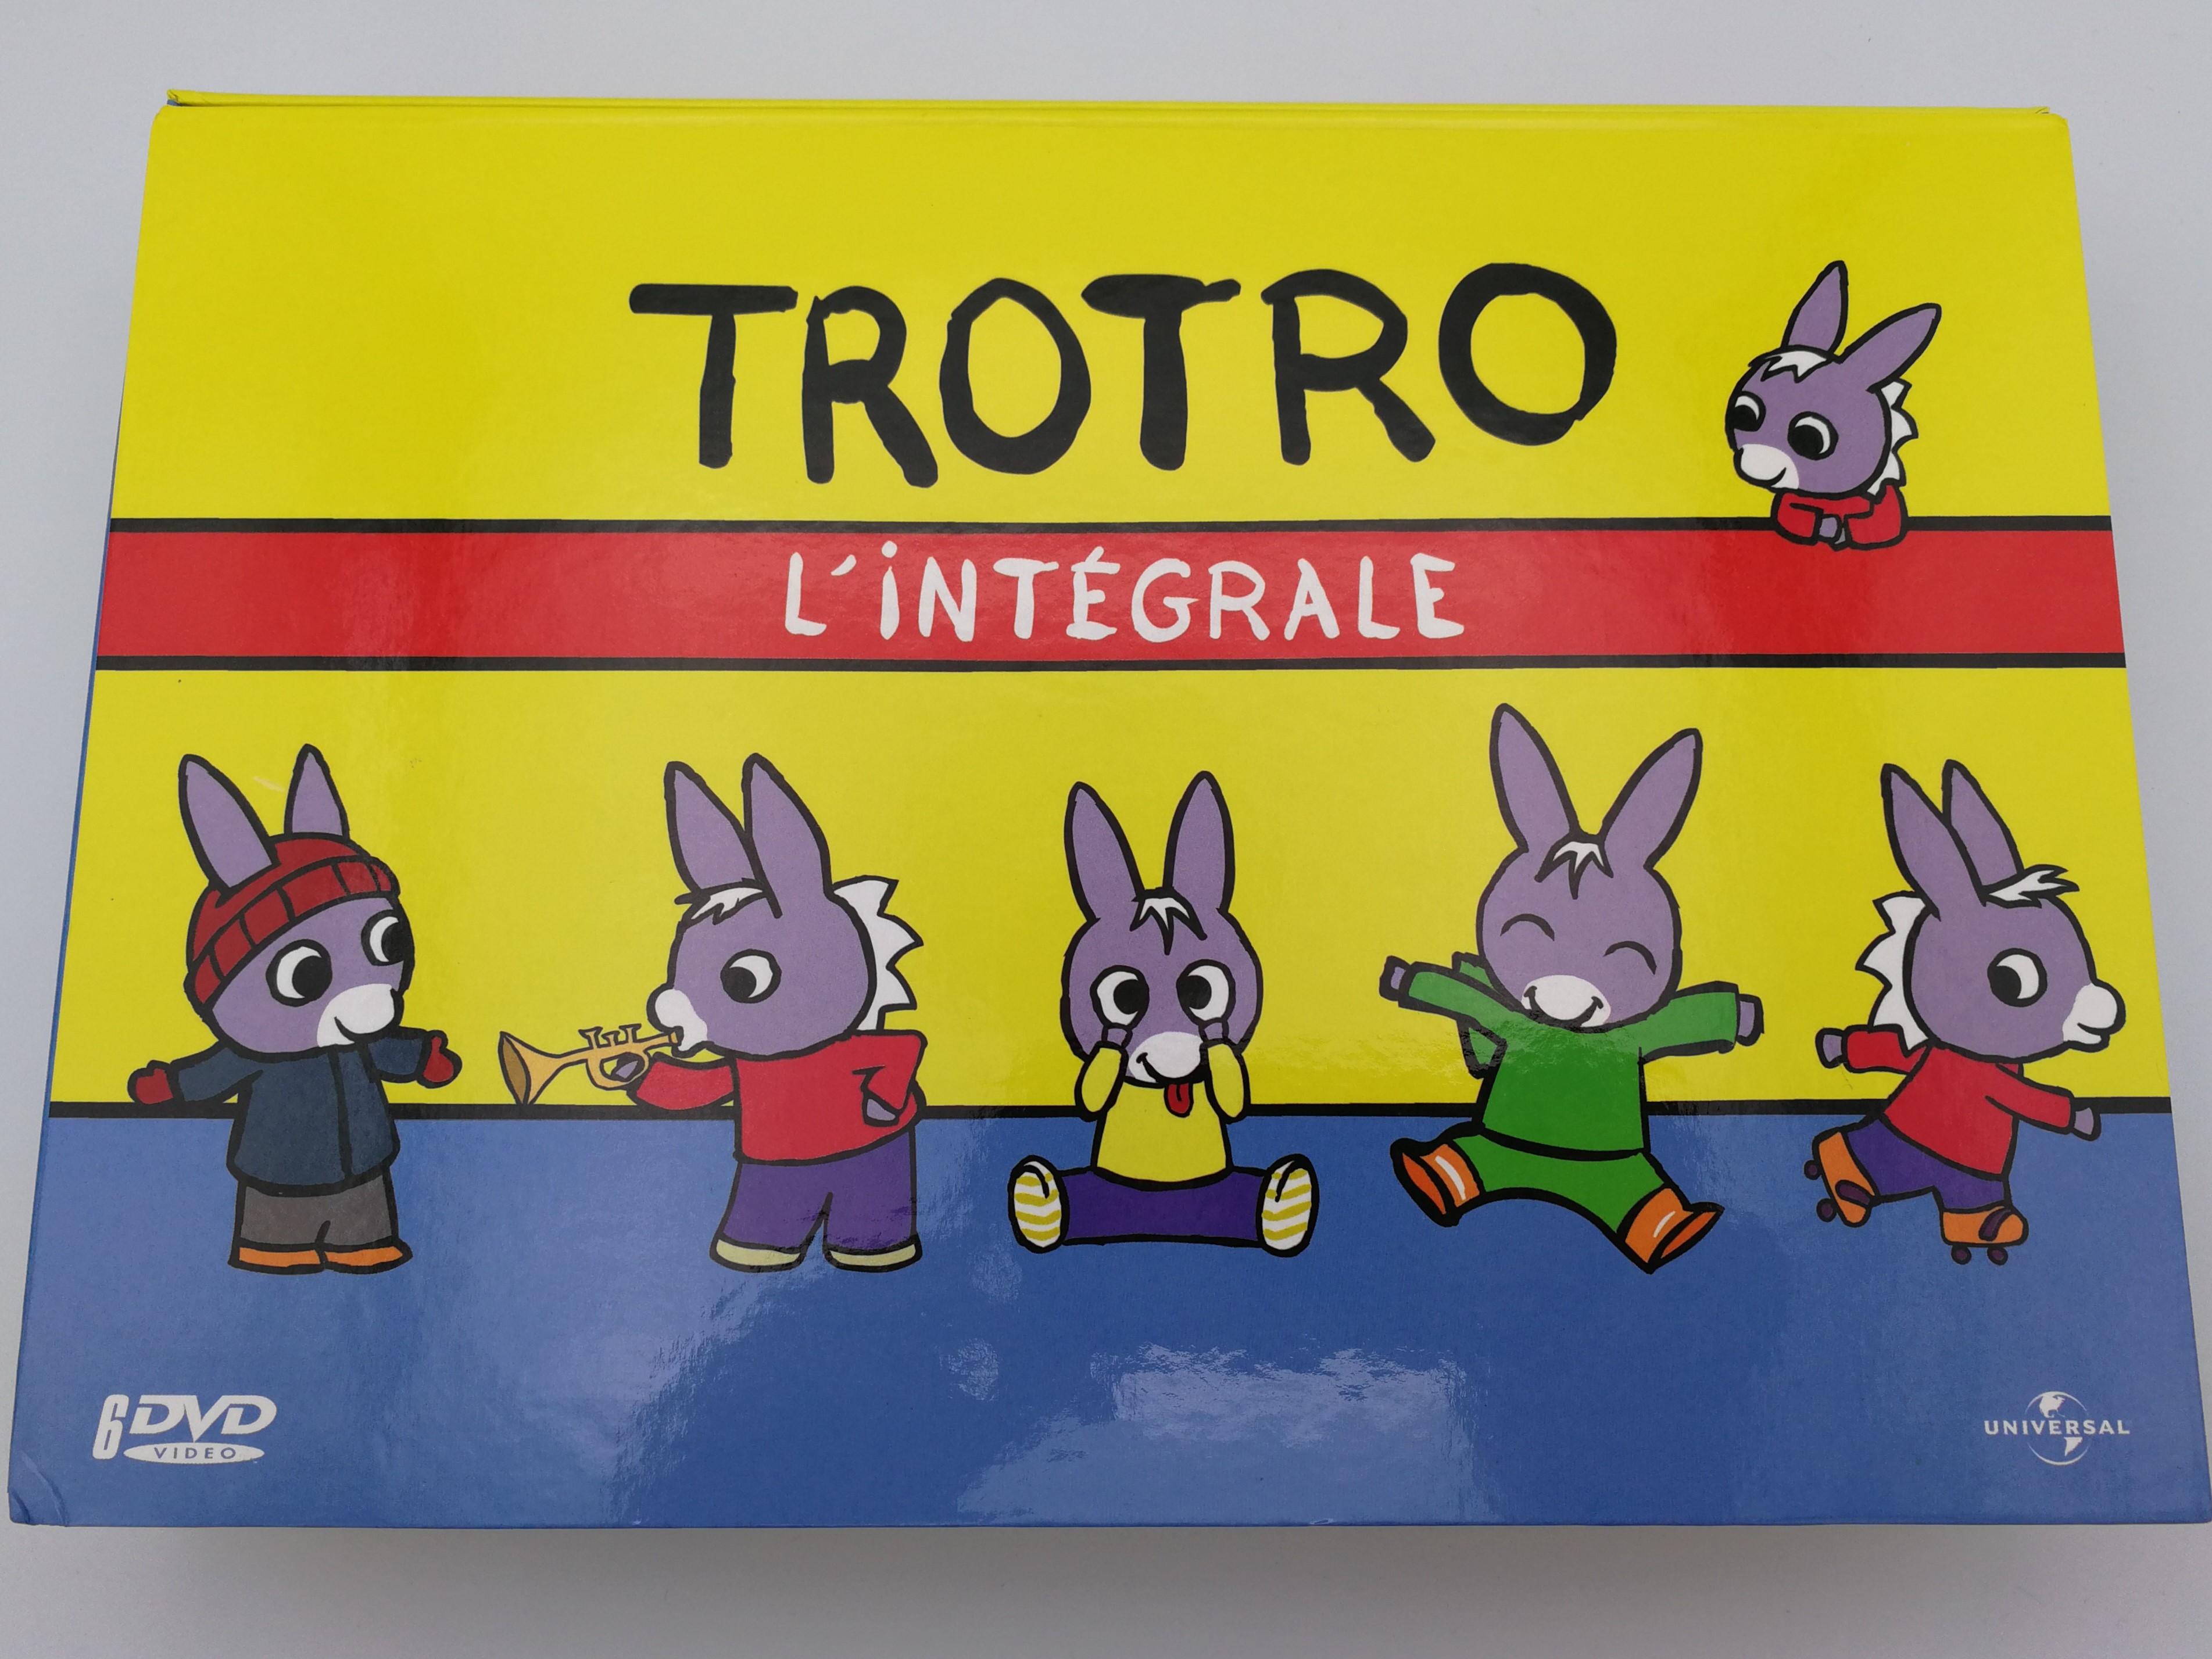 Trotro - L'intégrale 6 DVD Box 2004 / Directed by Eric Cazes, Stephane  Lezoray / French animated tv show / Full Series - 78 episodes - Bible in My  Language